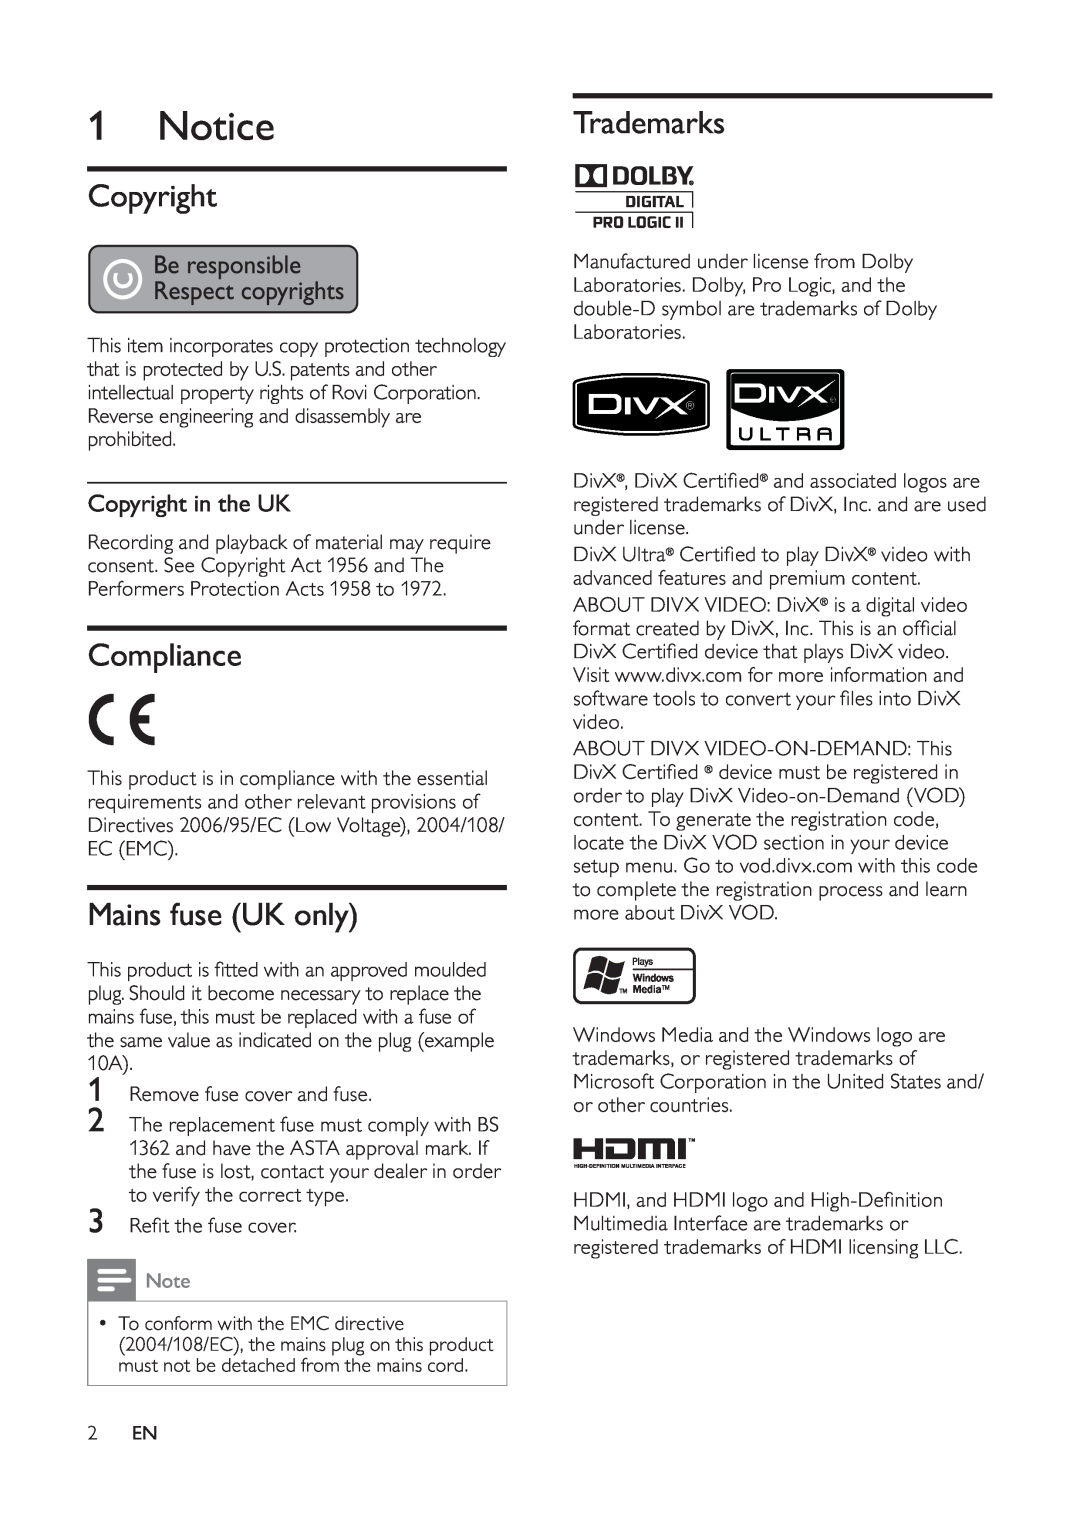 Philips HTS3510, HTS3520 manual 1Notice, Compliance, Mains fuse UK only, Trademarks, Copyright in the UK 